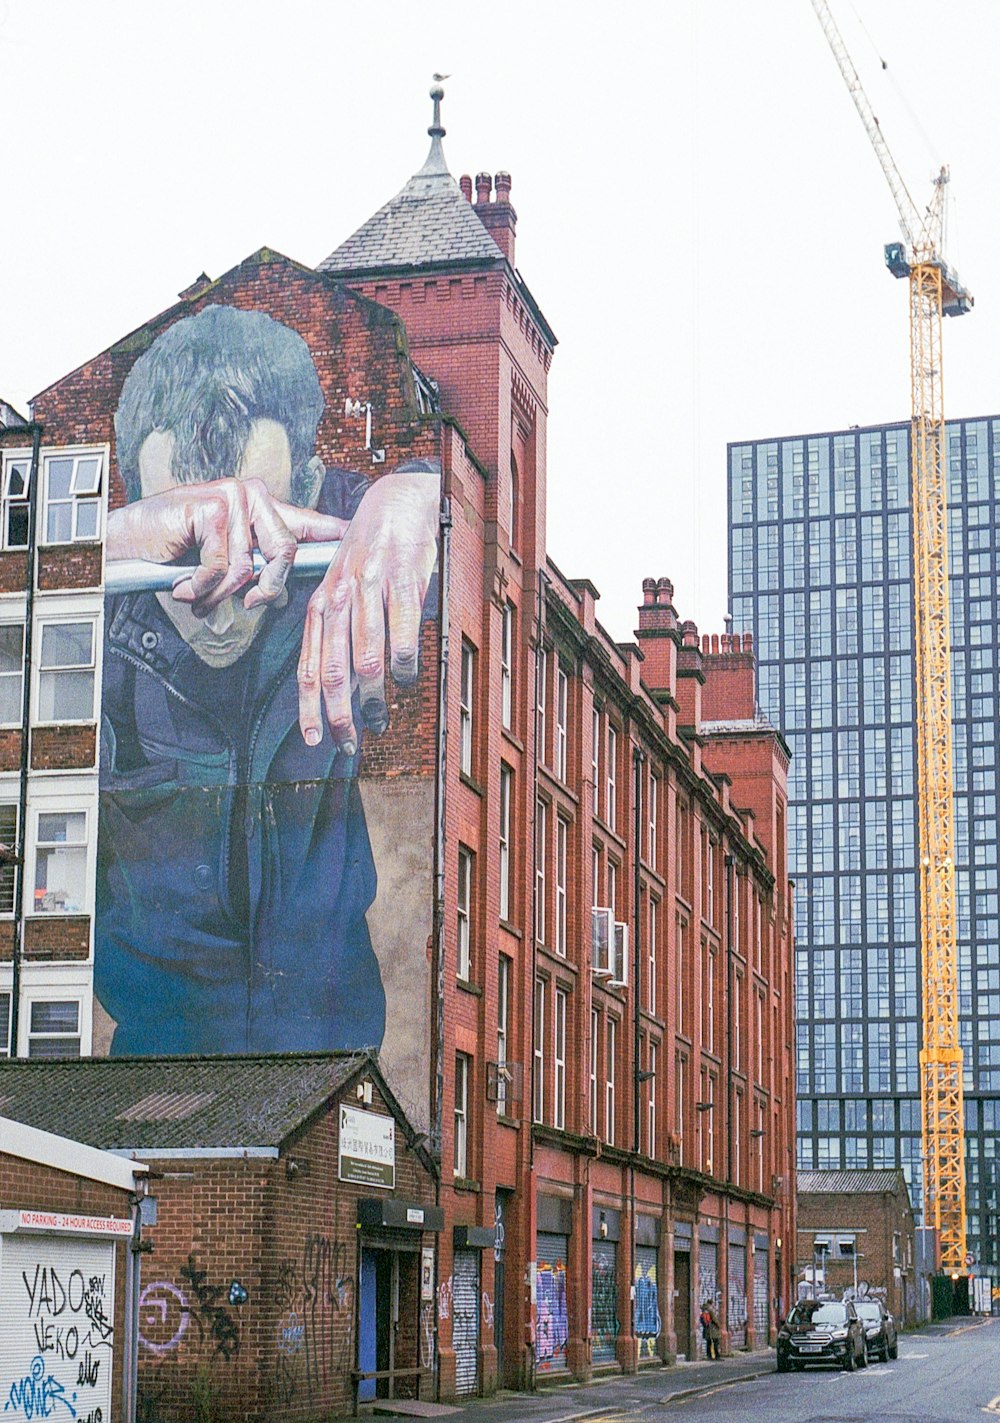 a large mural of a man smoking a cigarette on the side of a building